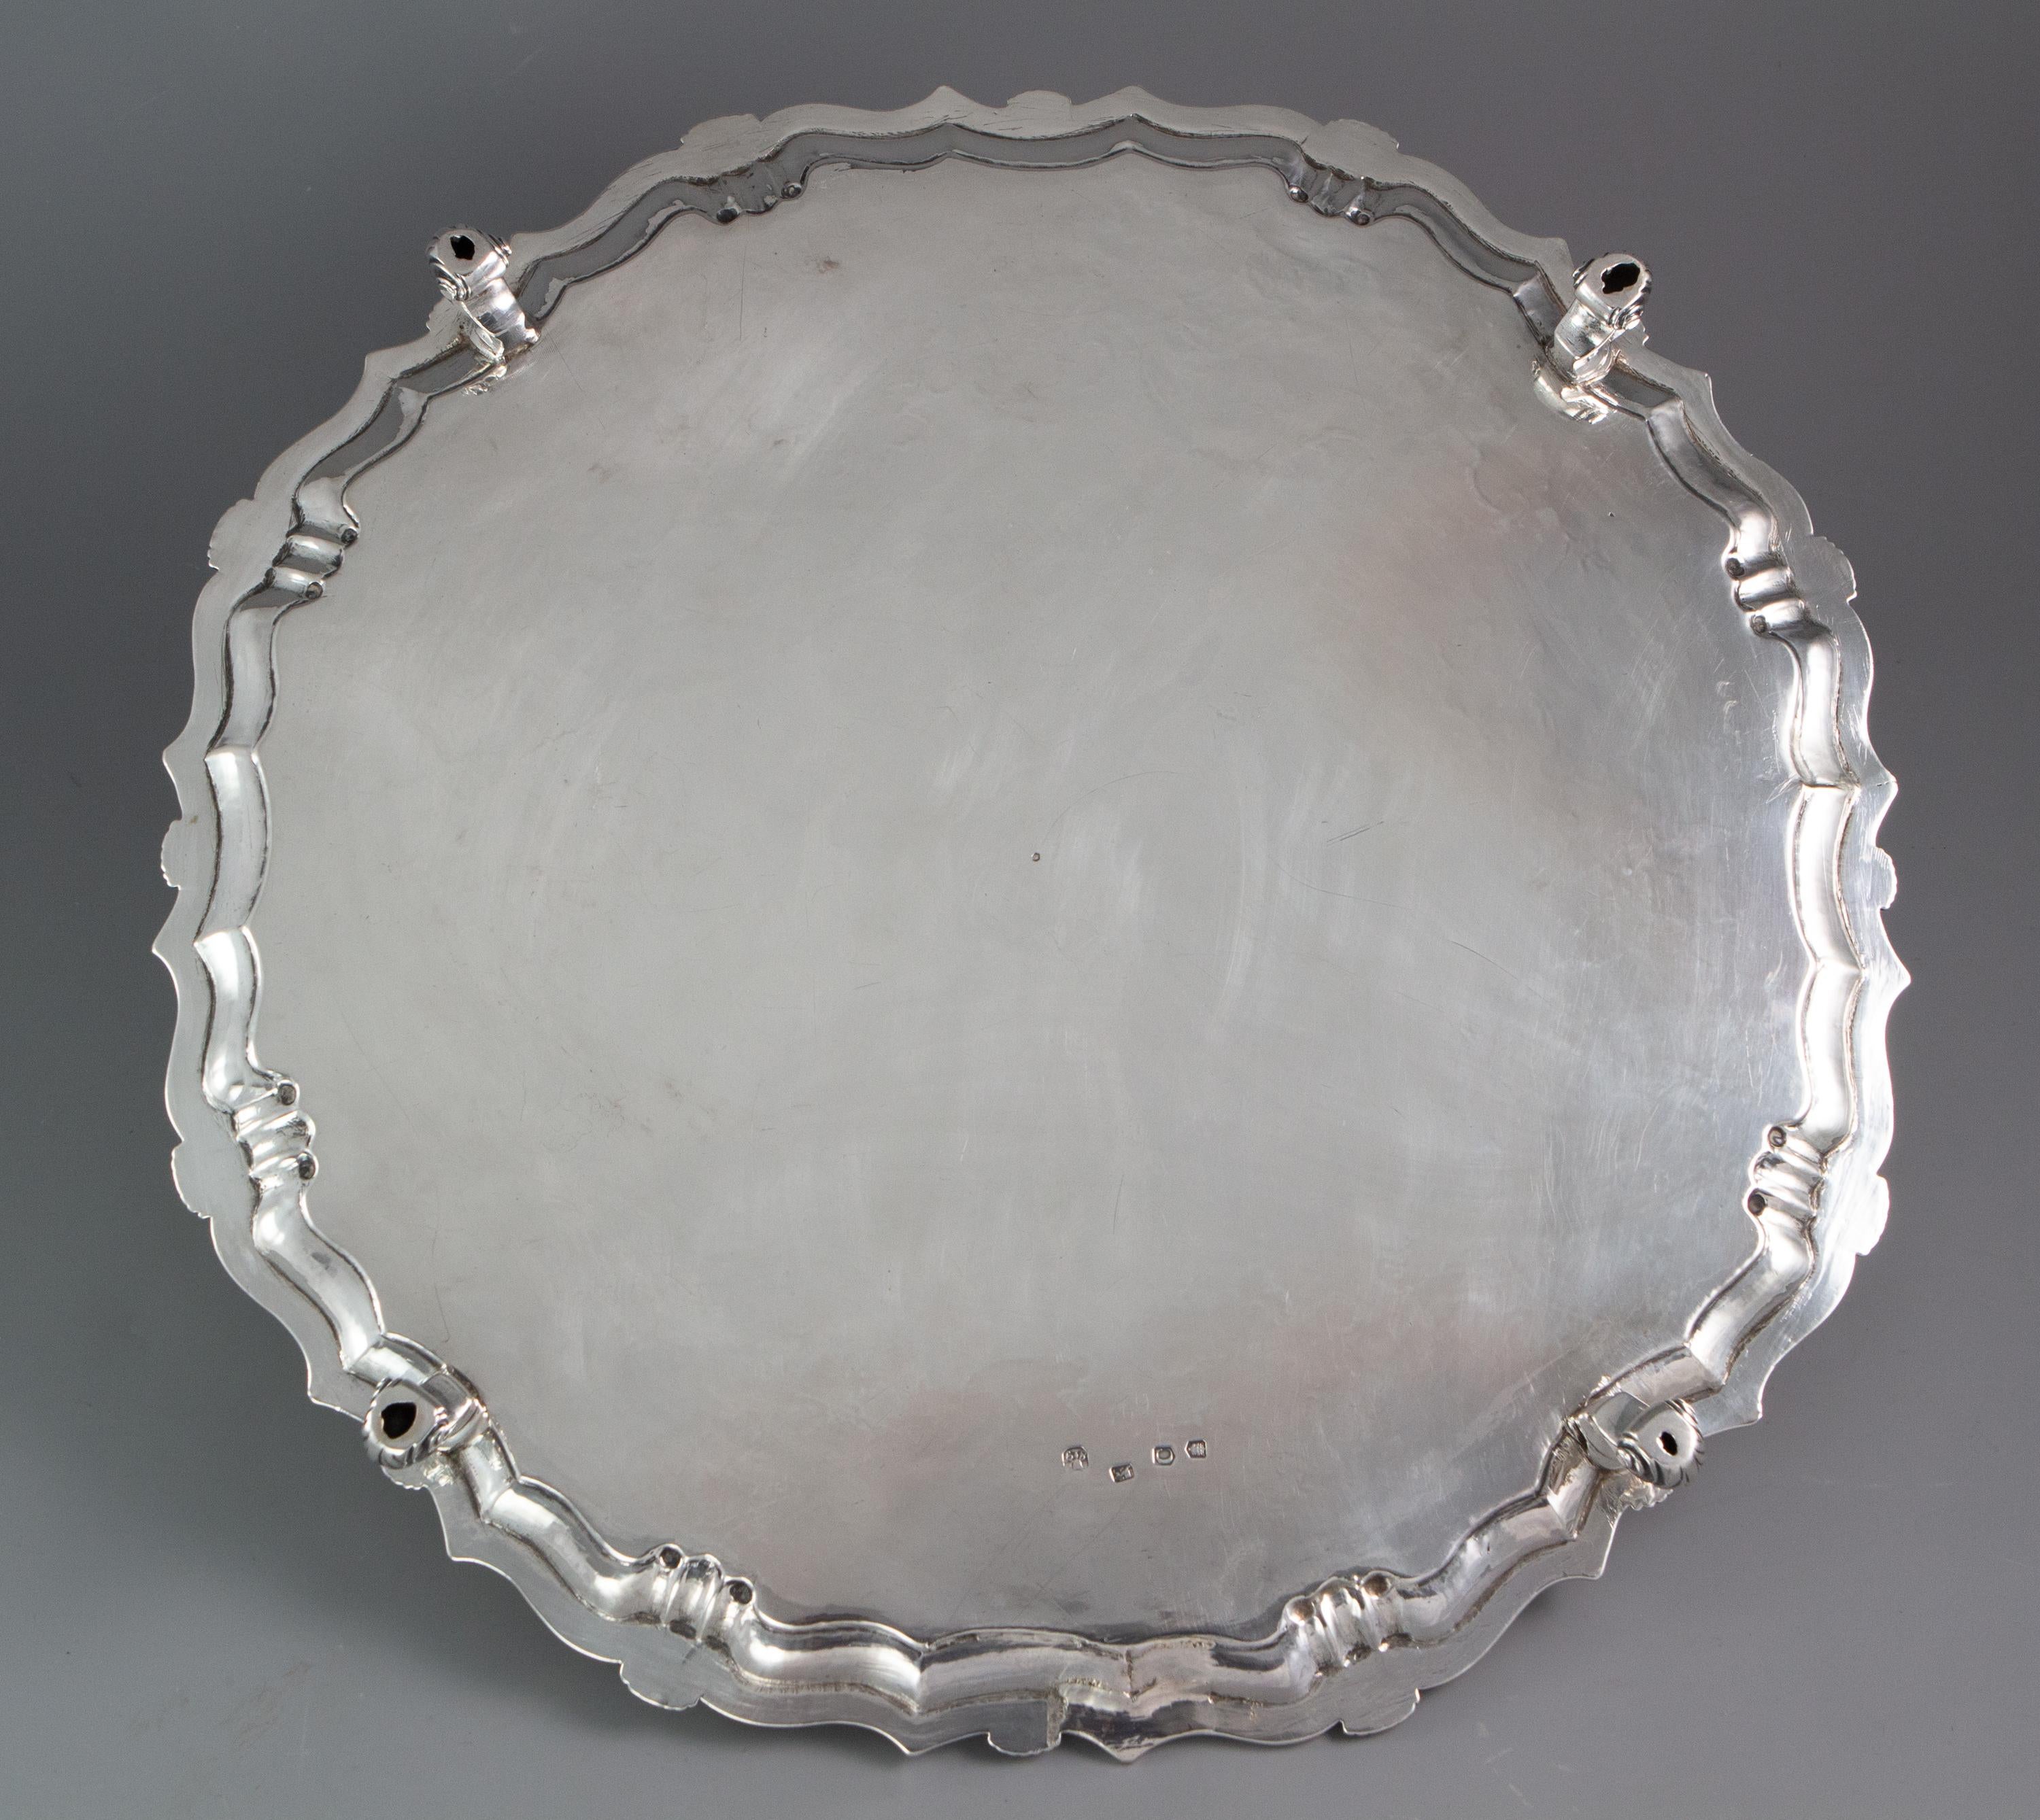 A large and impressive George II octagonal silver salver with pie crust edge and shell decoration. The central plate engraved with cornucopia of fruits and flowers amidst patterned arabesques. The centre engraved with an armorial beneath a crown.